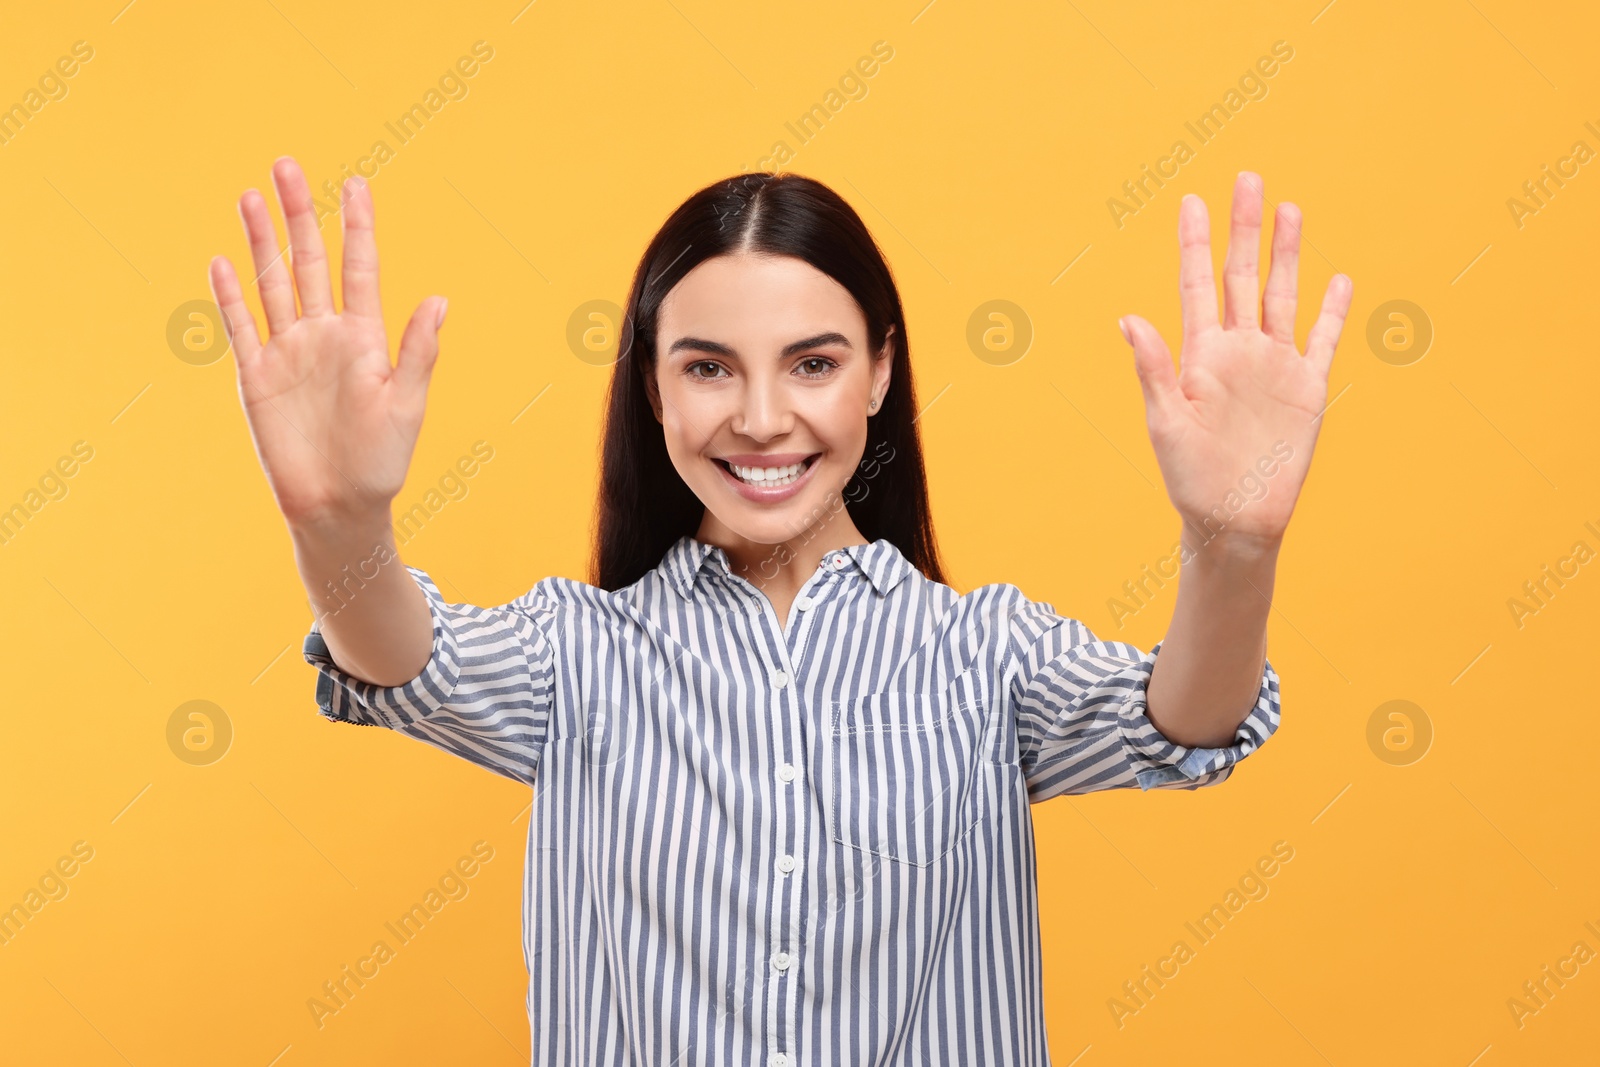 Photo of Happy woman giving high five with both hands on orange background